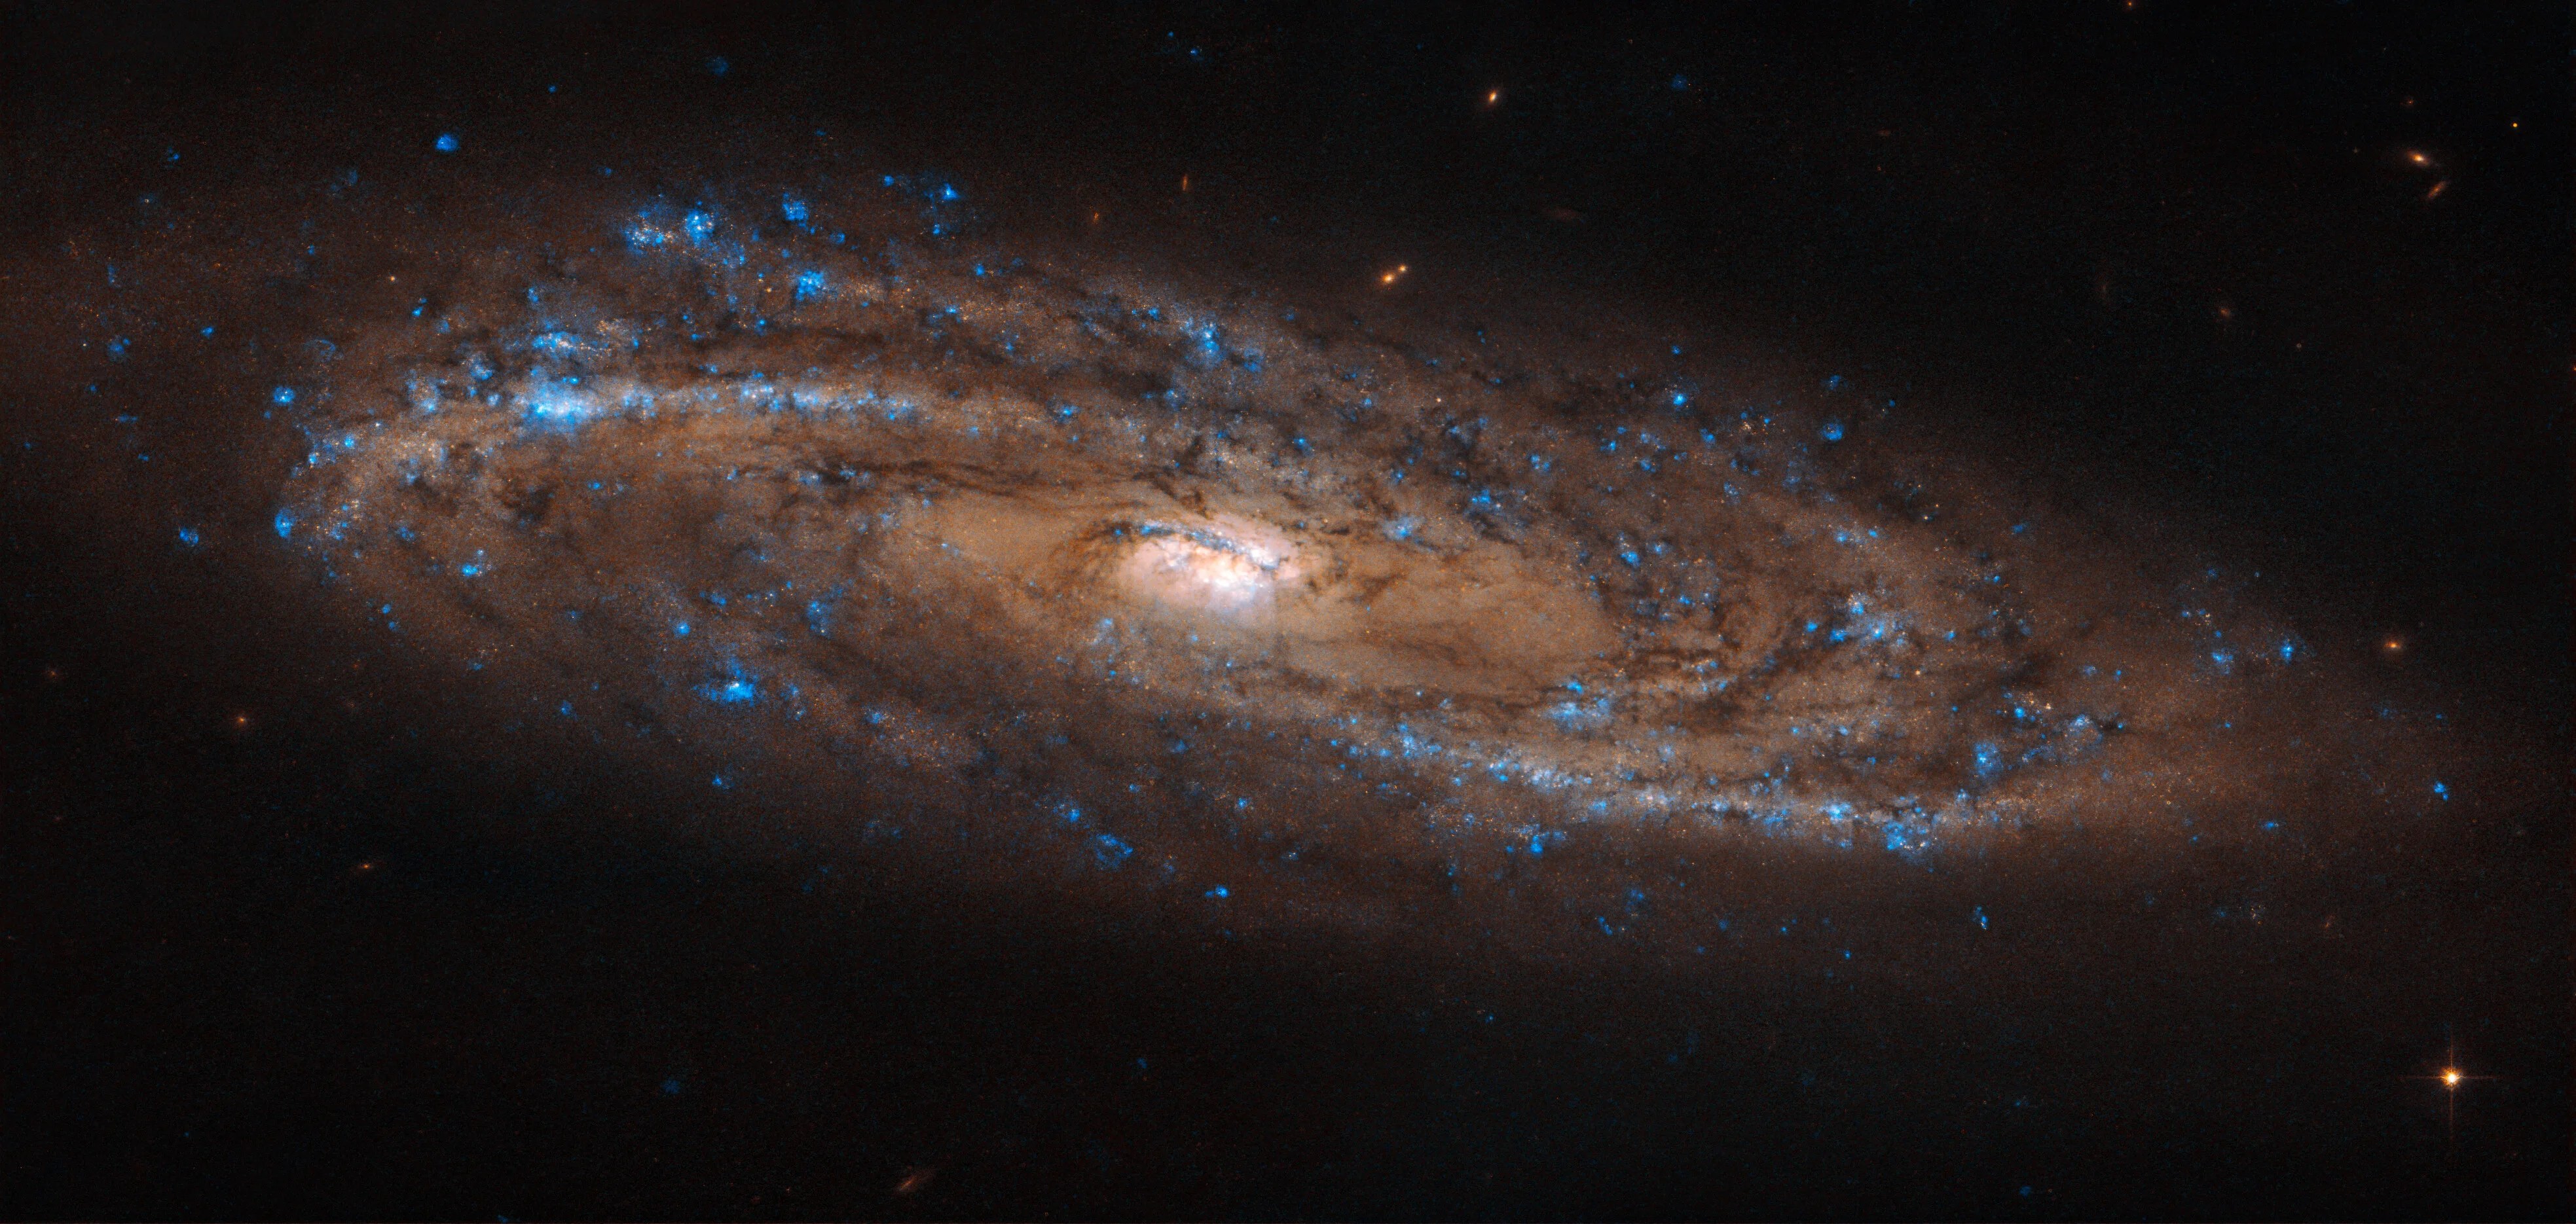 Spiral galaxy ngc 4100 as seen by hubble